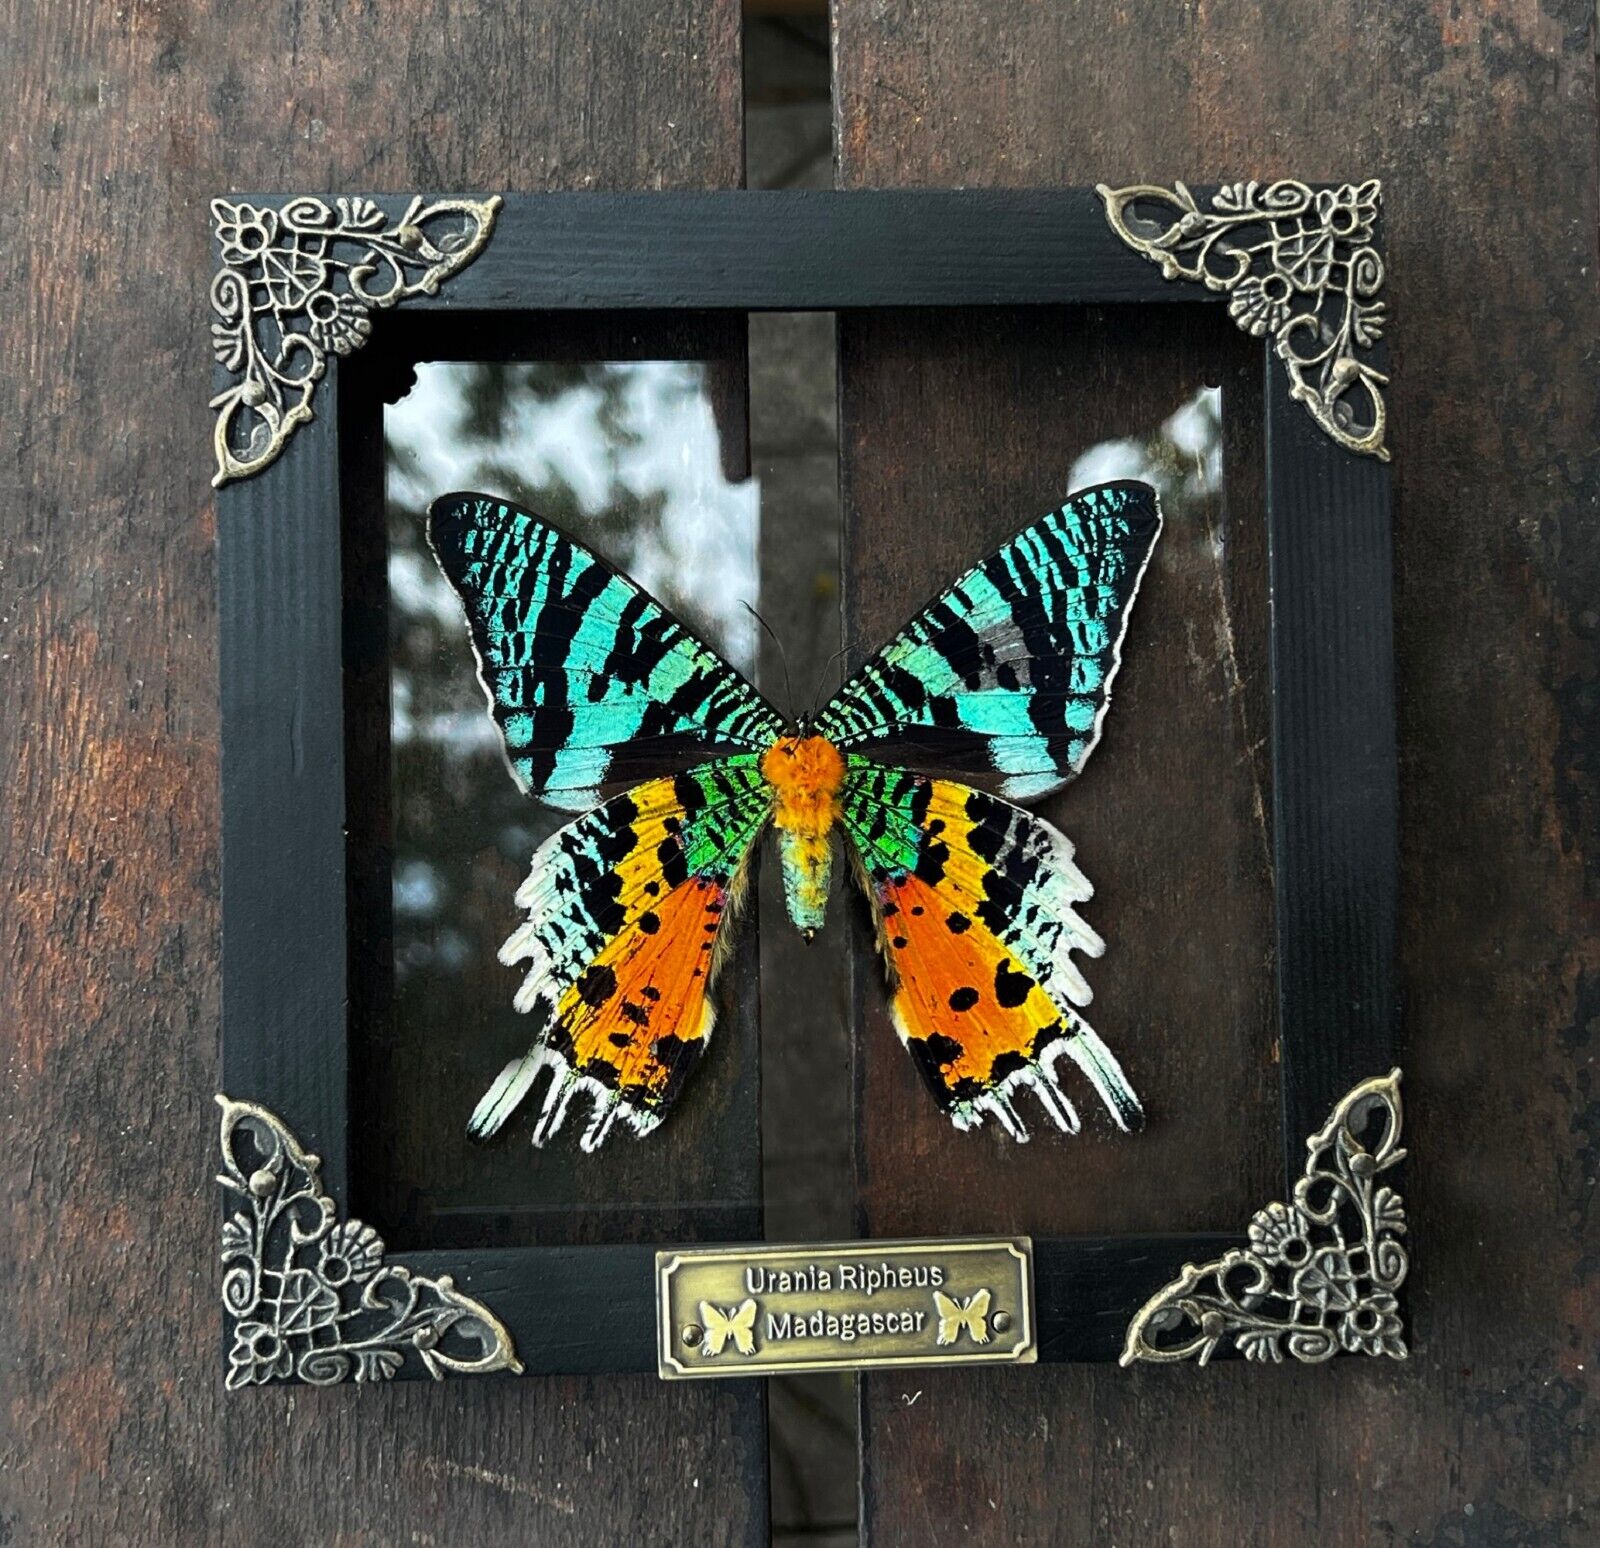 Madagascan Sunset Moth Preserved Butterfly Framed Insect in Clear Shadow Box